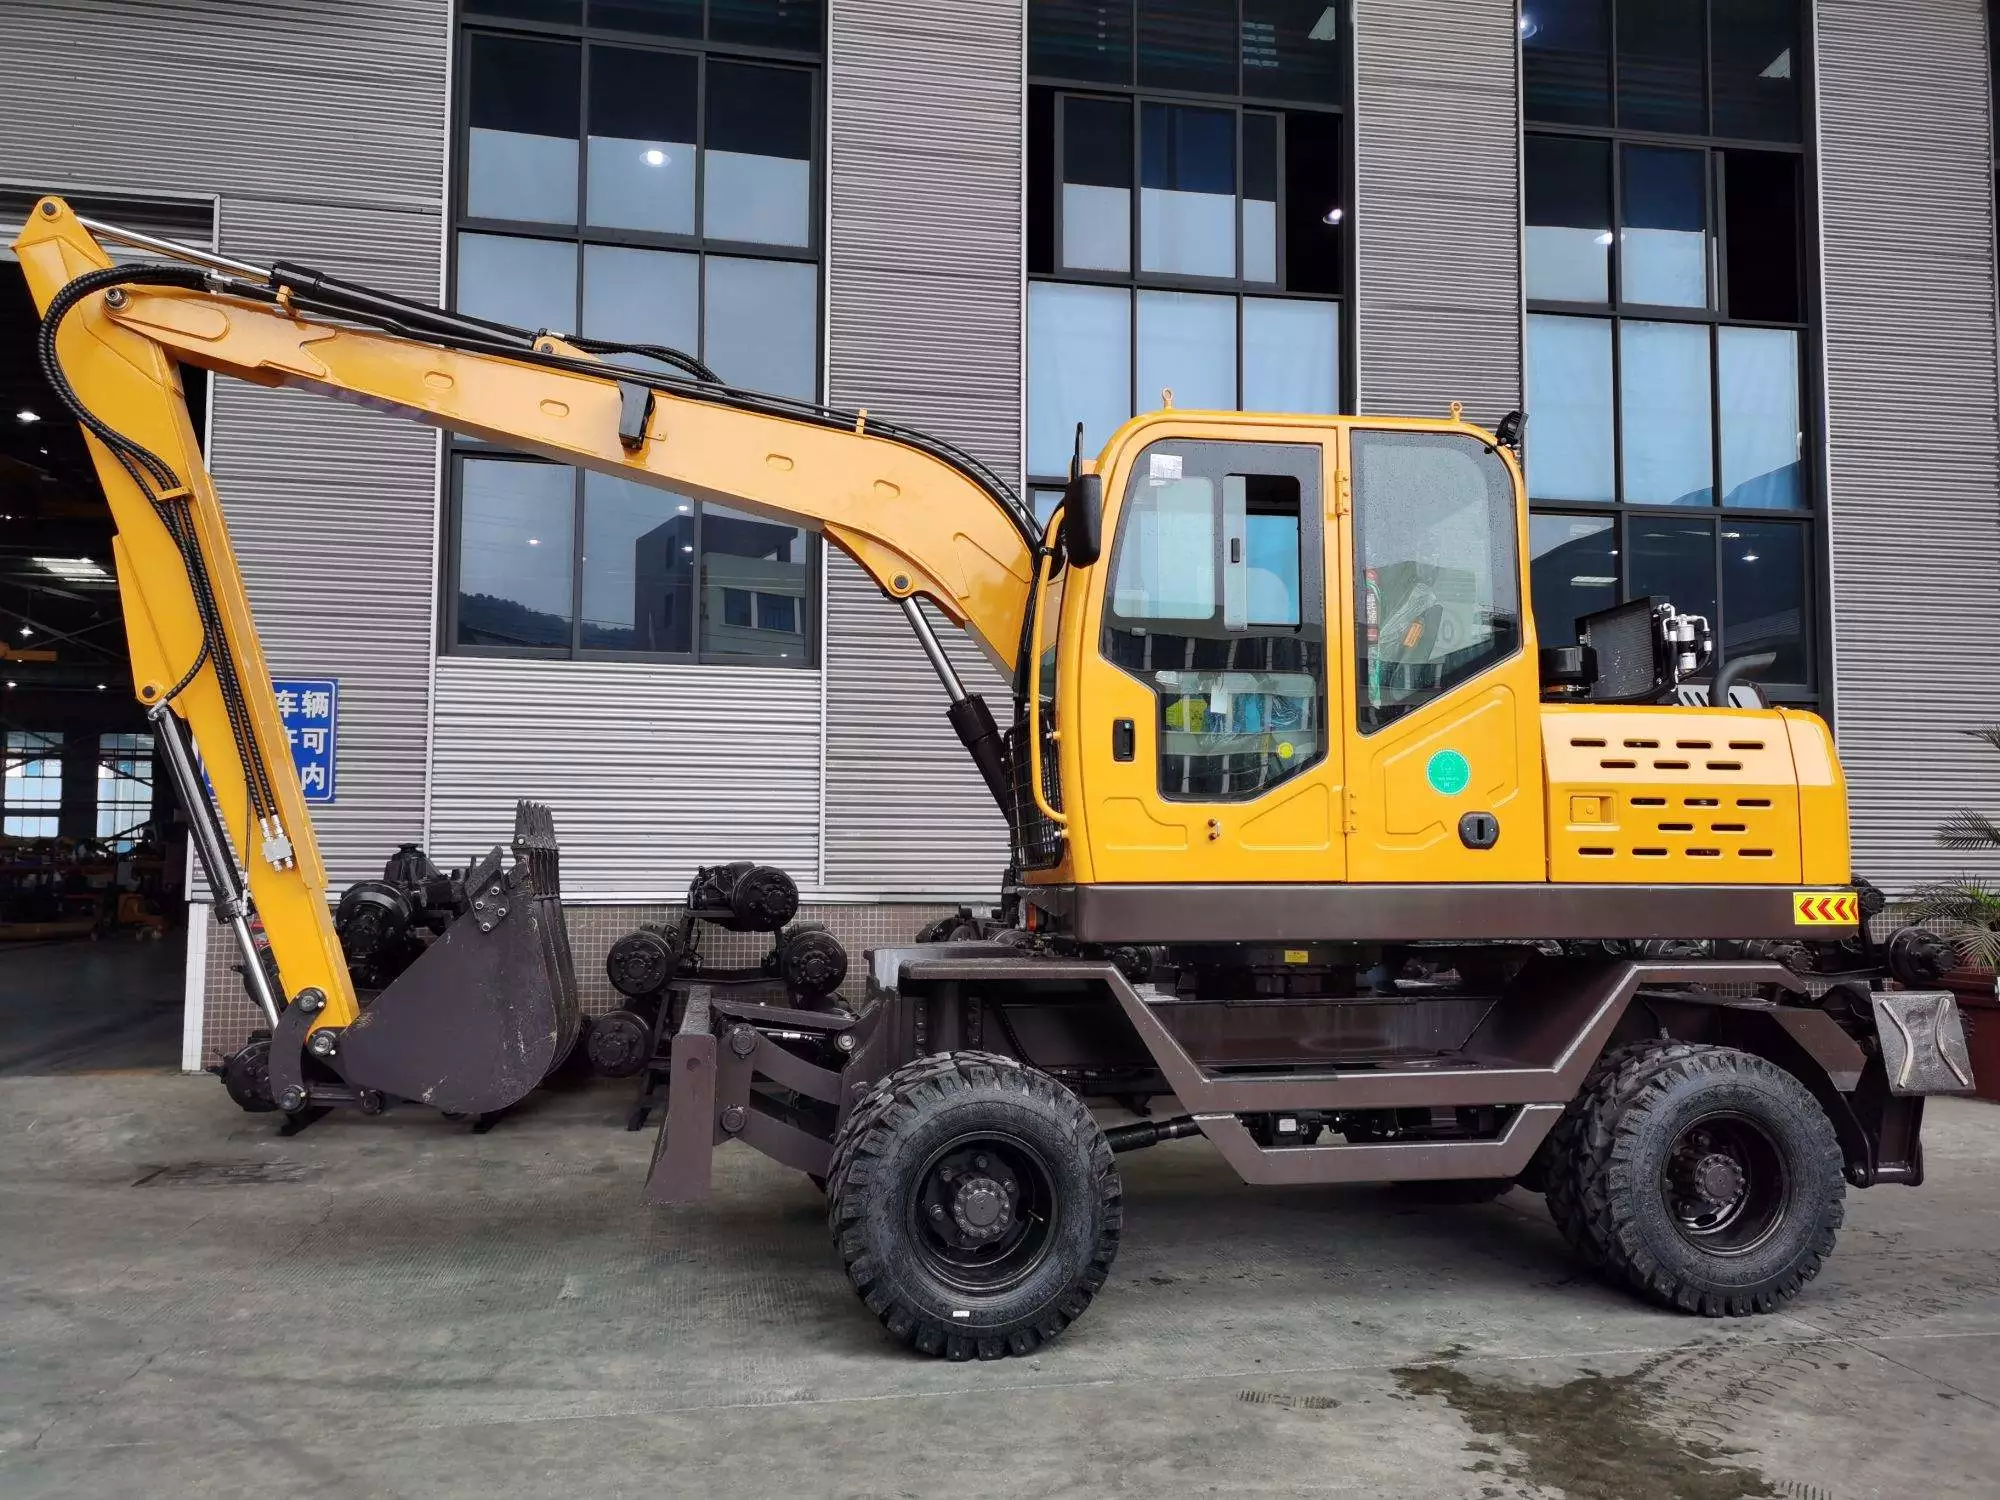 8.36 Ton Wheeled Loader with Brush Grapple, Rate Power 65 KW